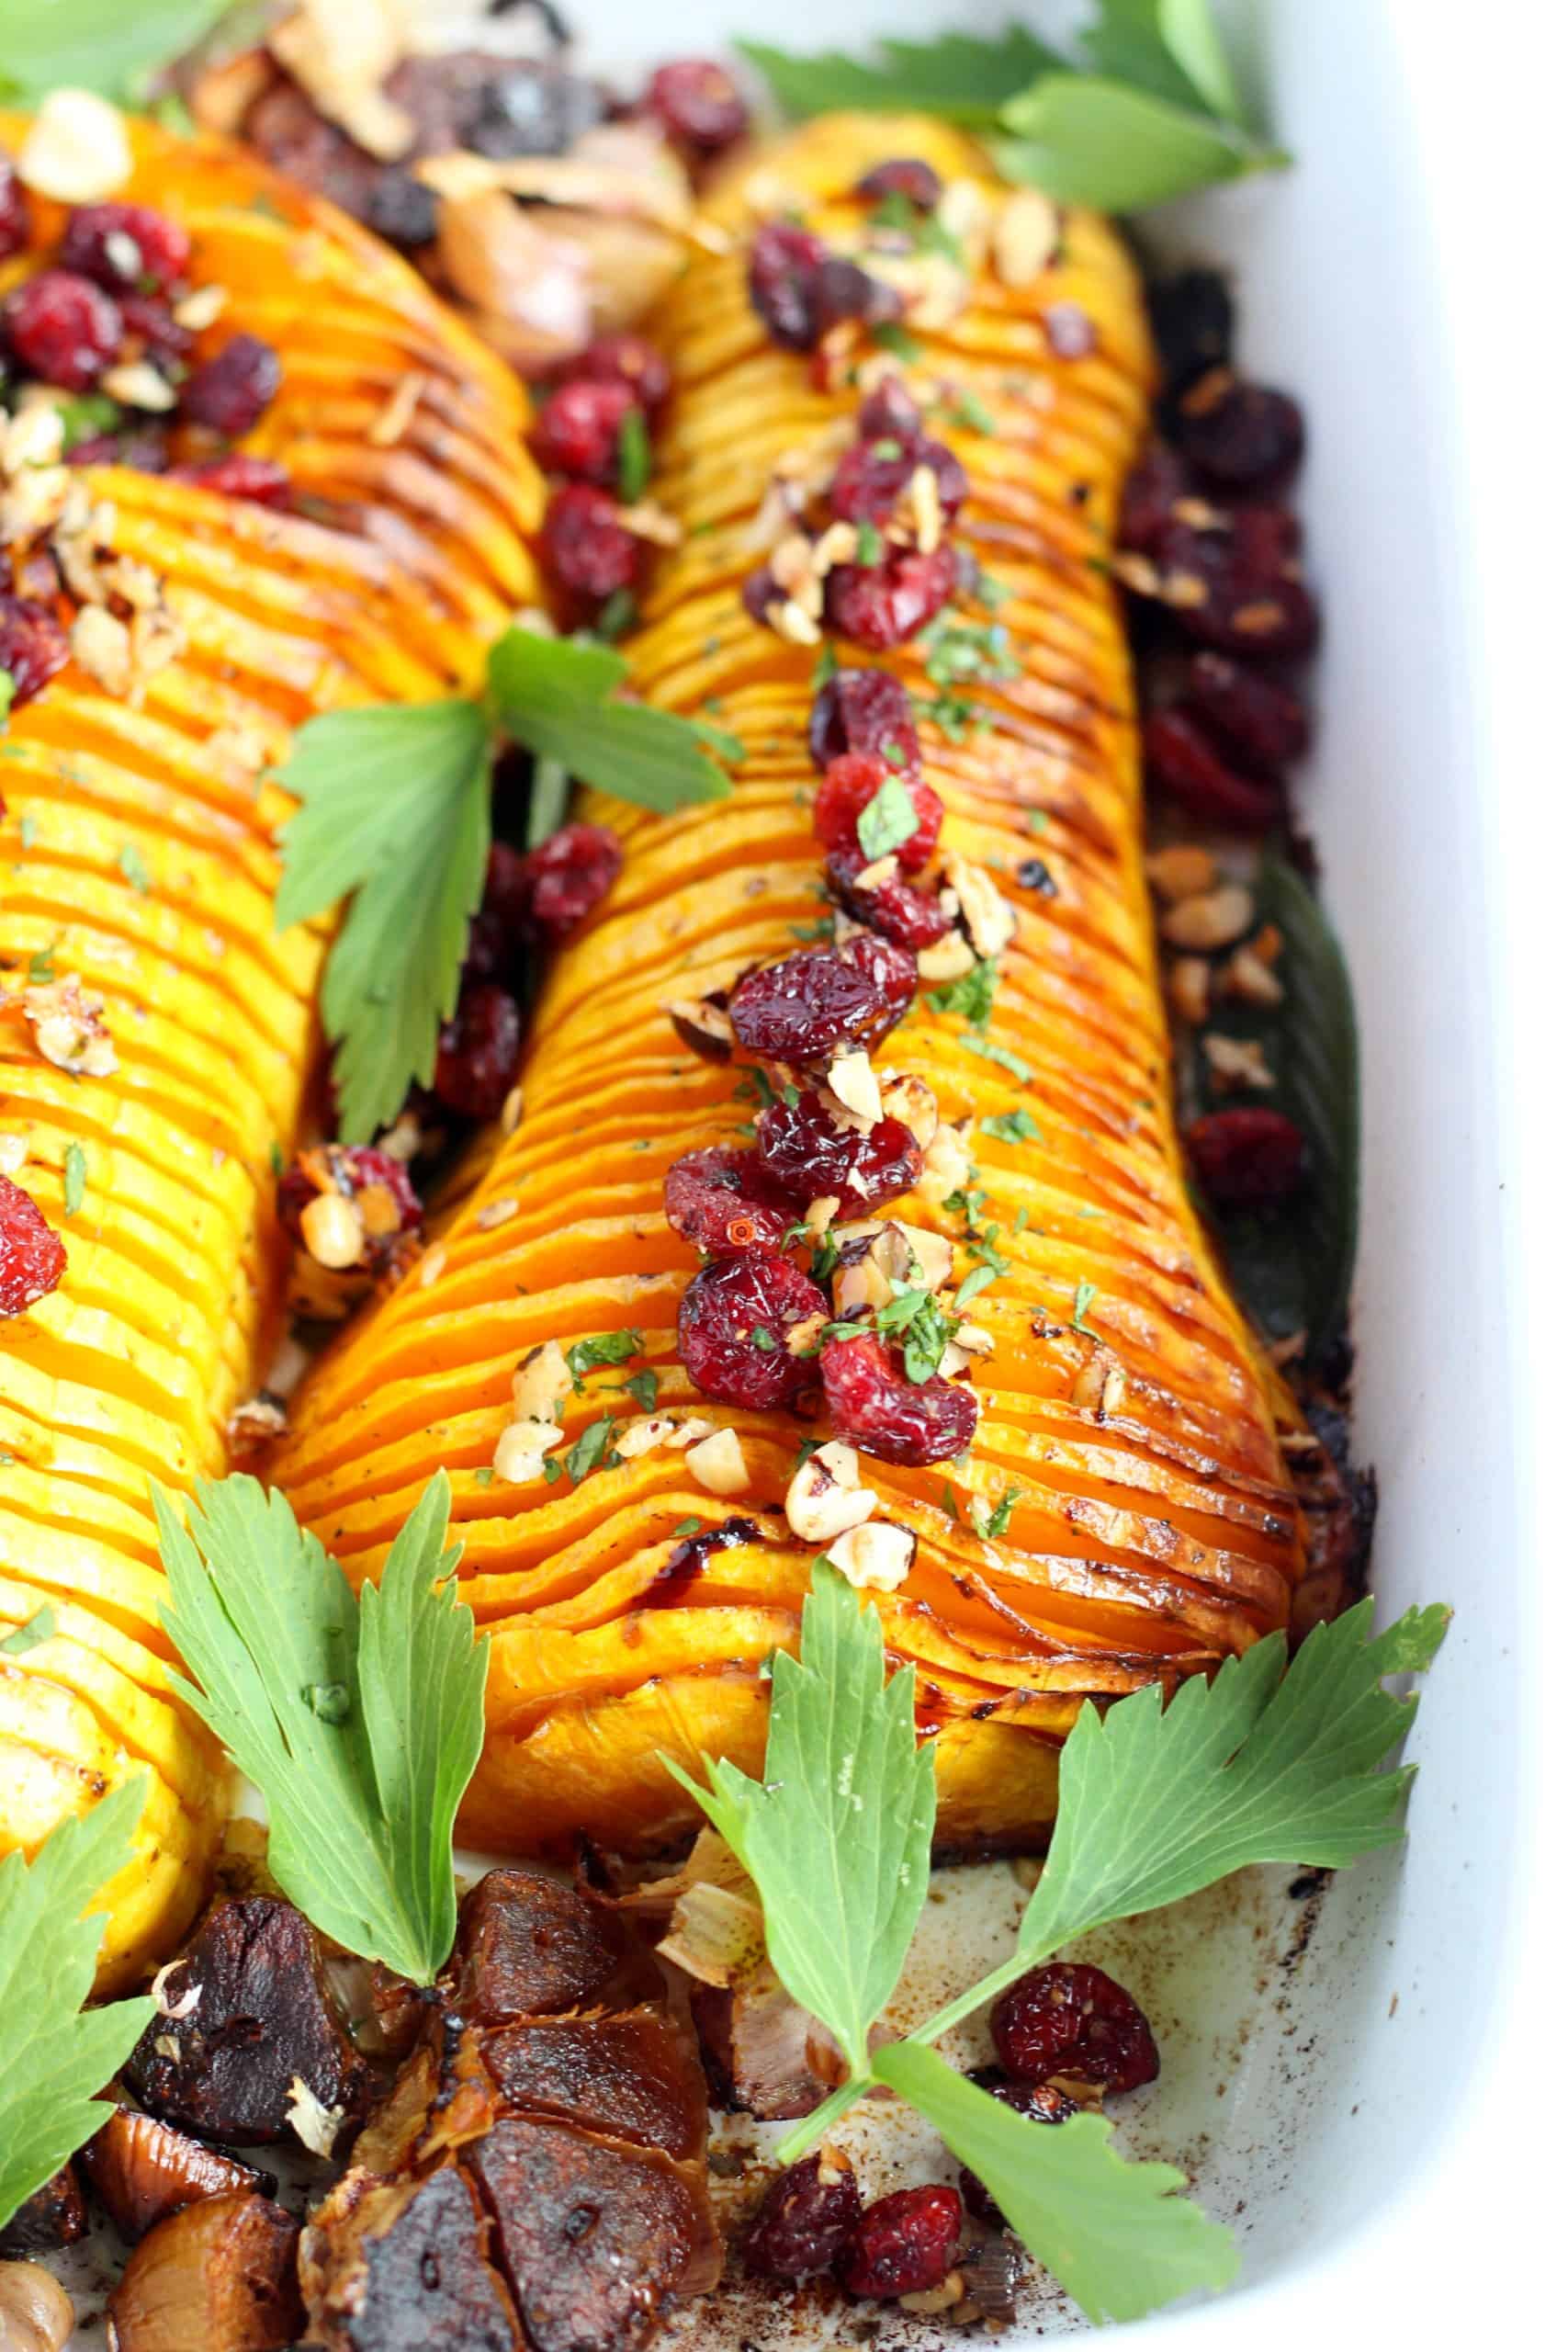 hasselback butternut squash with nuts and cranberries